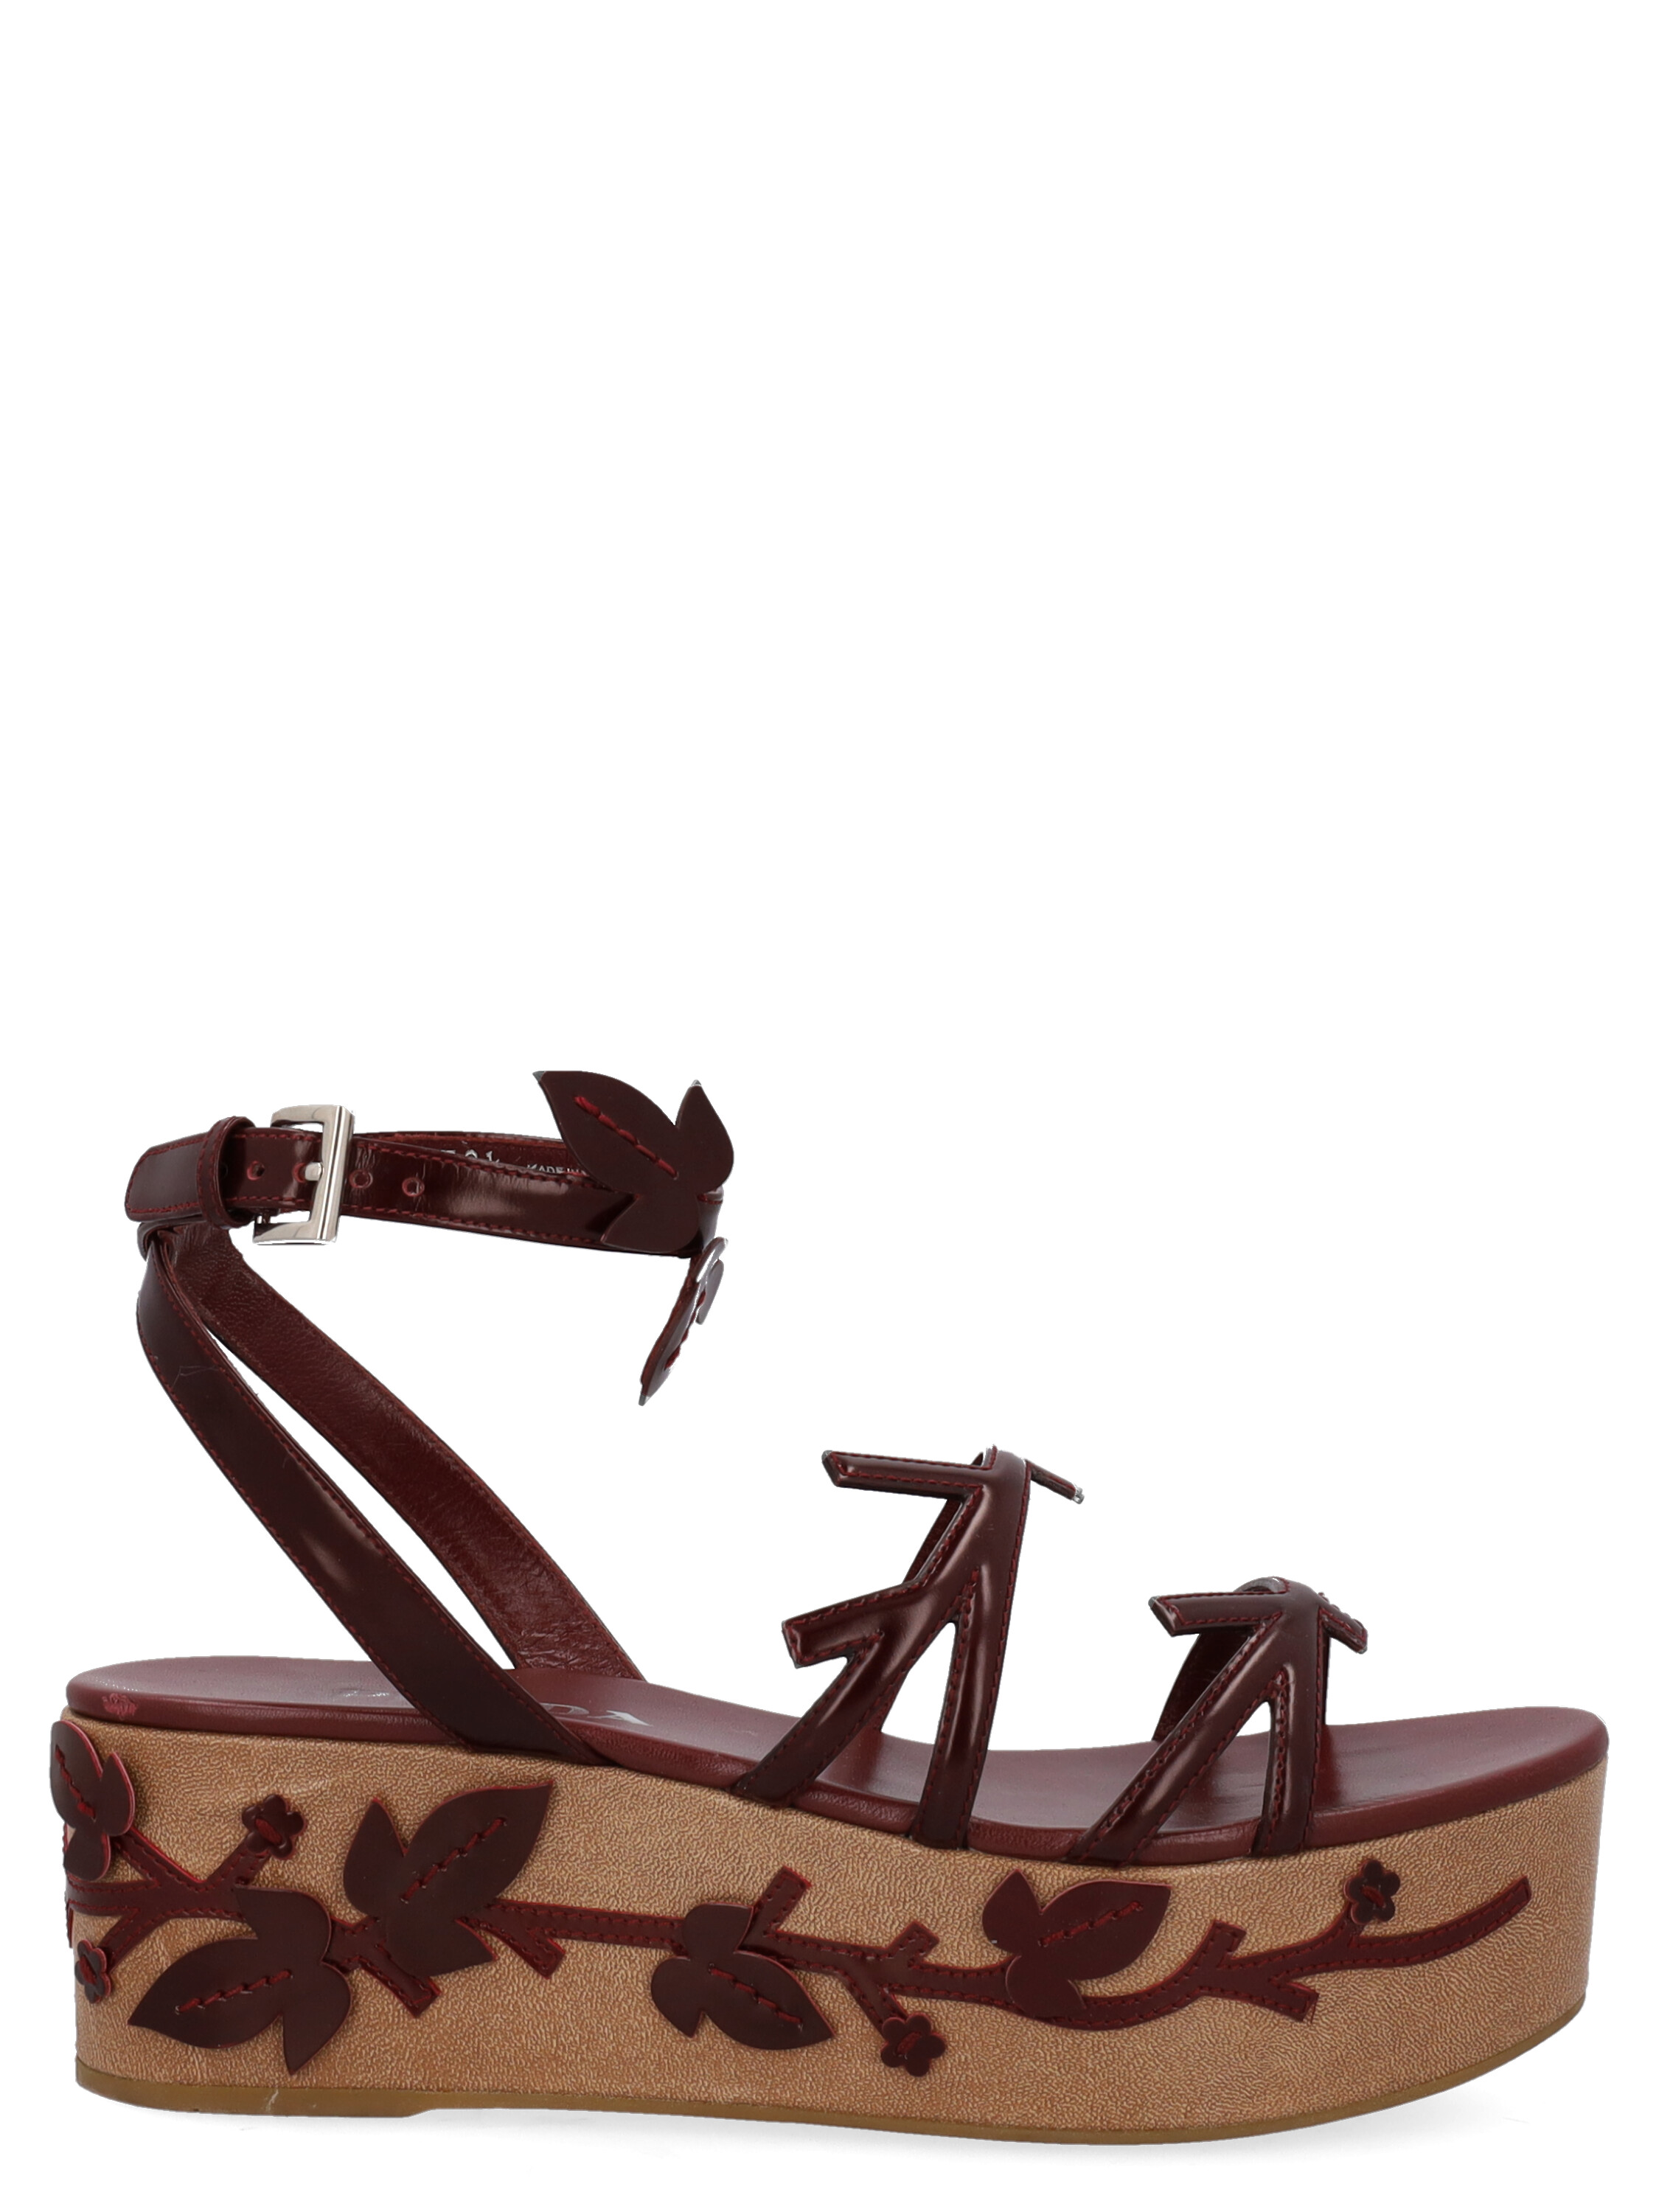 Pre-owned Prada Women's Sandals -  - In Burgundy Leather